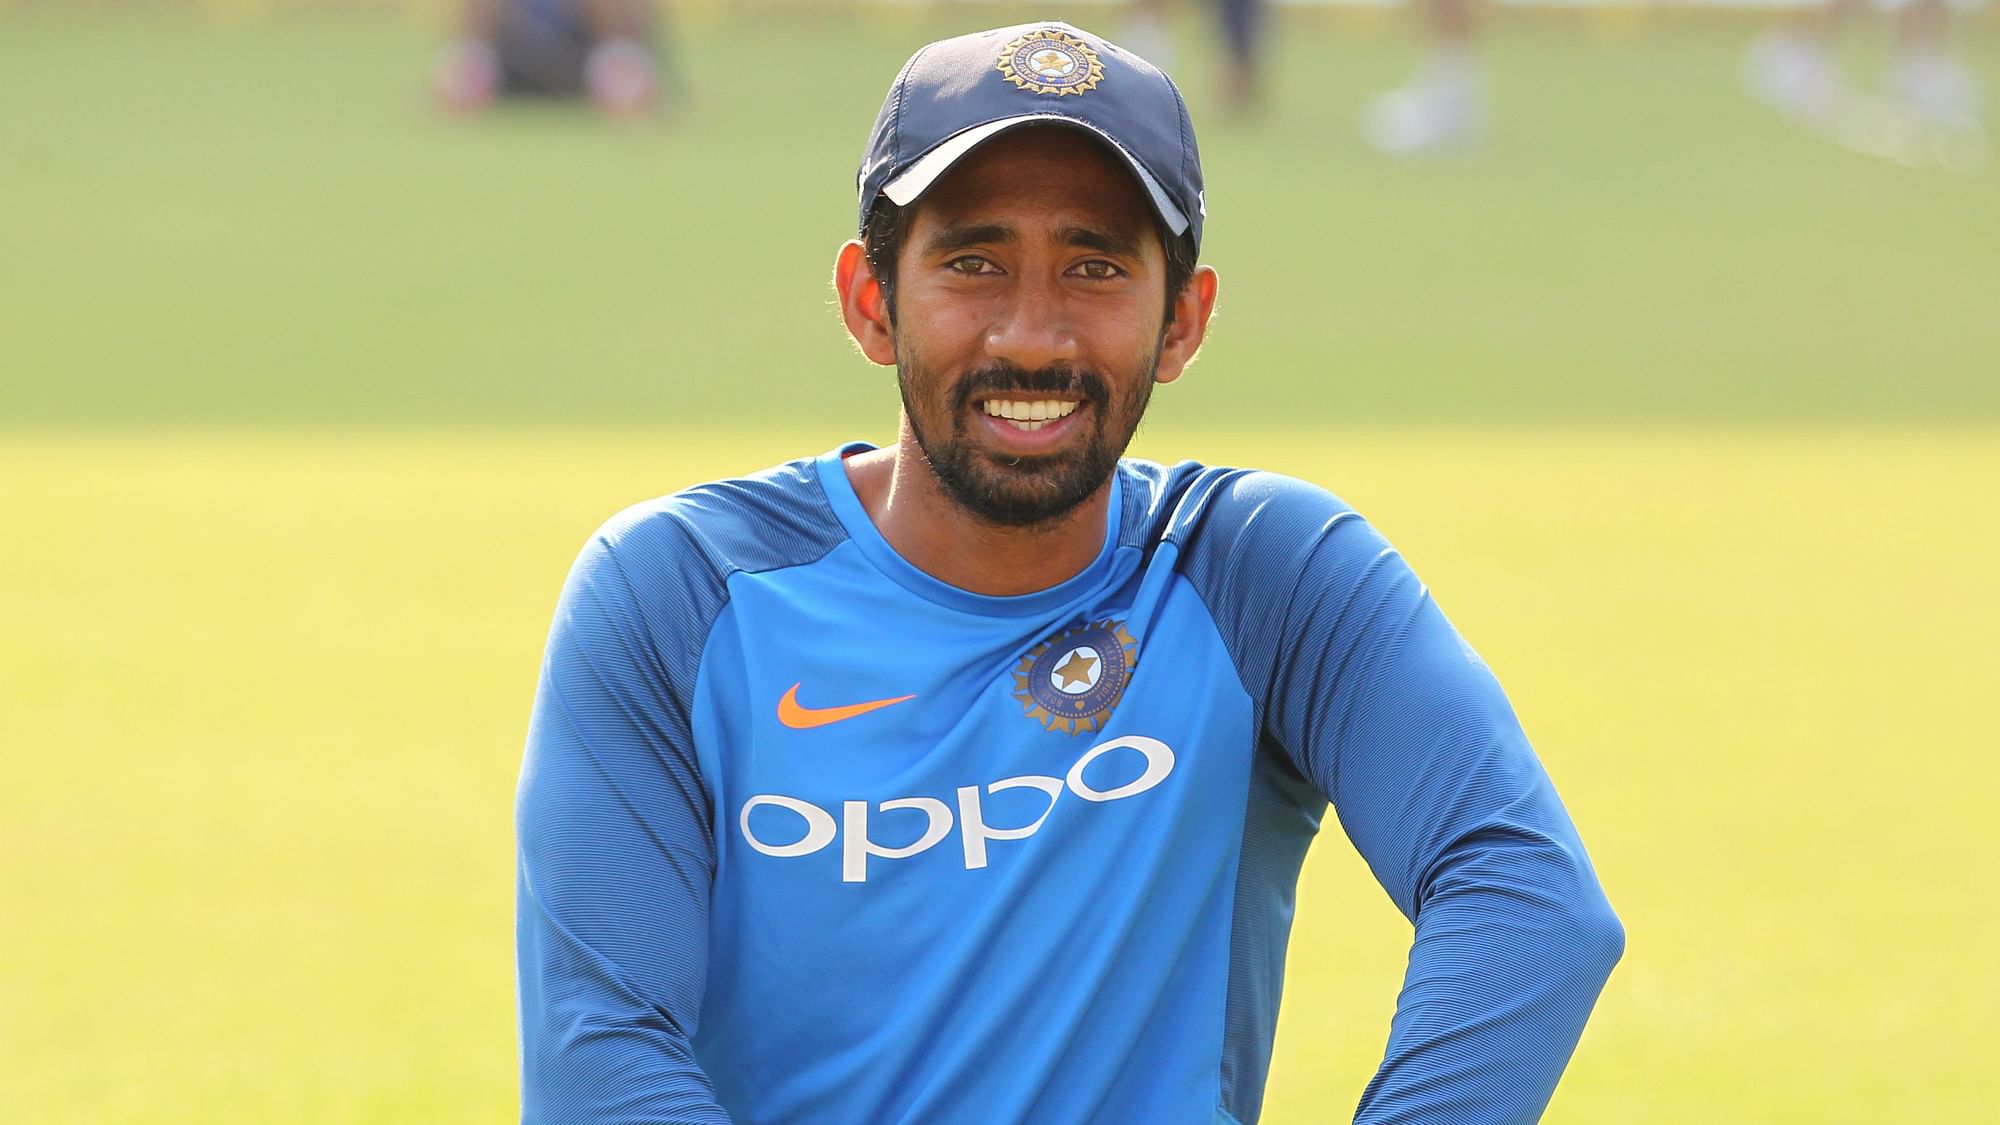 Wriddhiman Saha is making a comeback after injuring himself during India’s tour of South Africa in 2018.